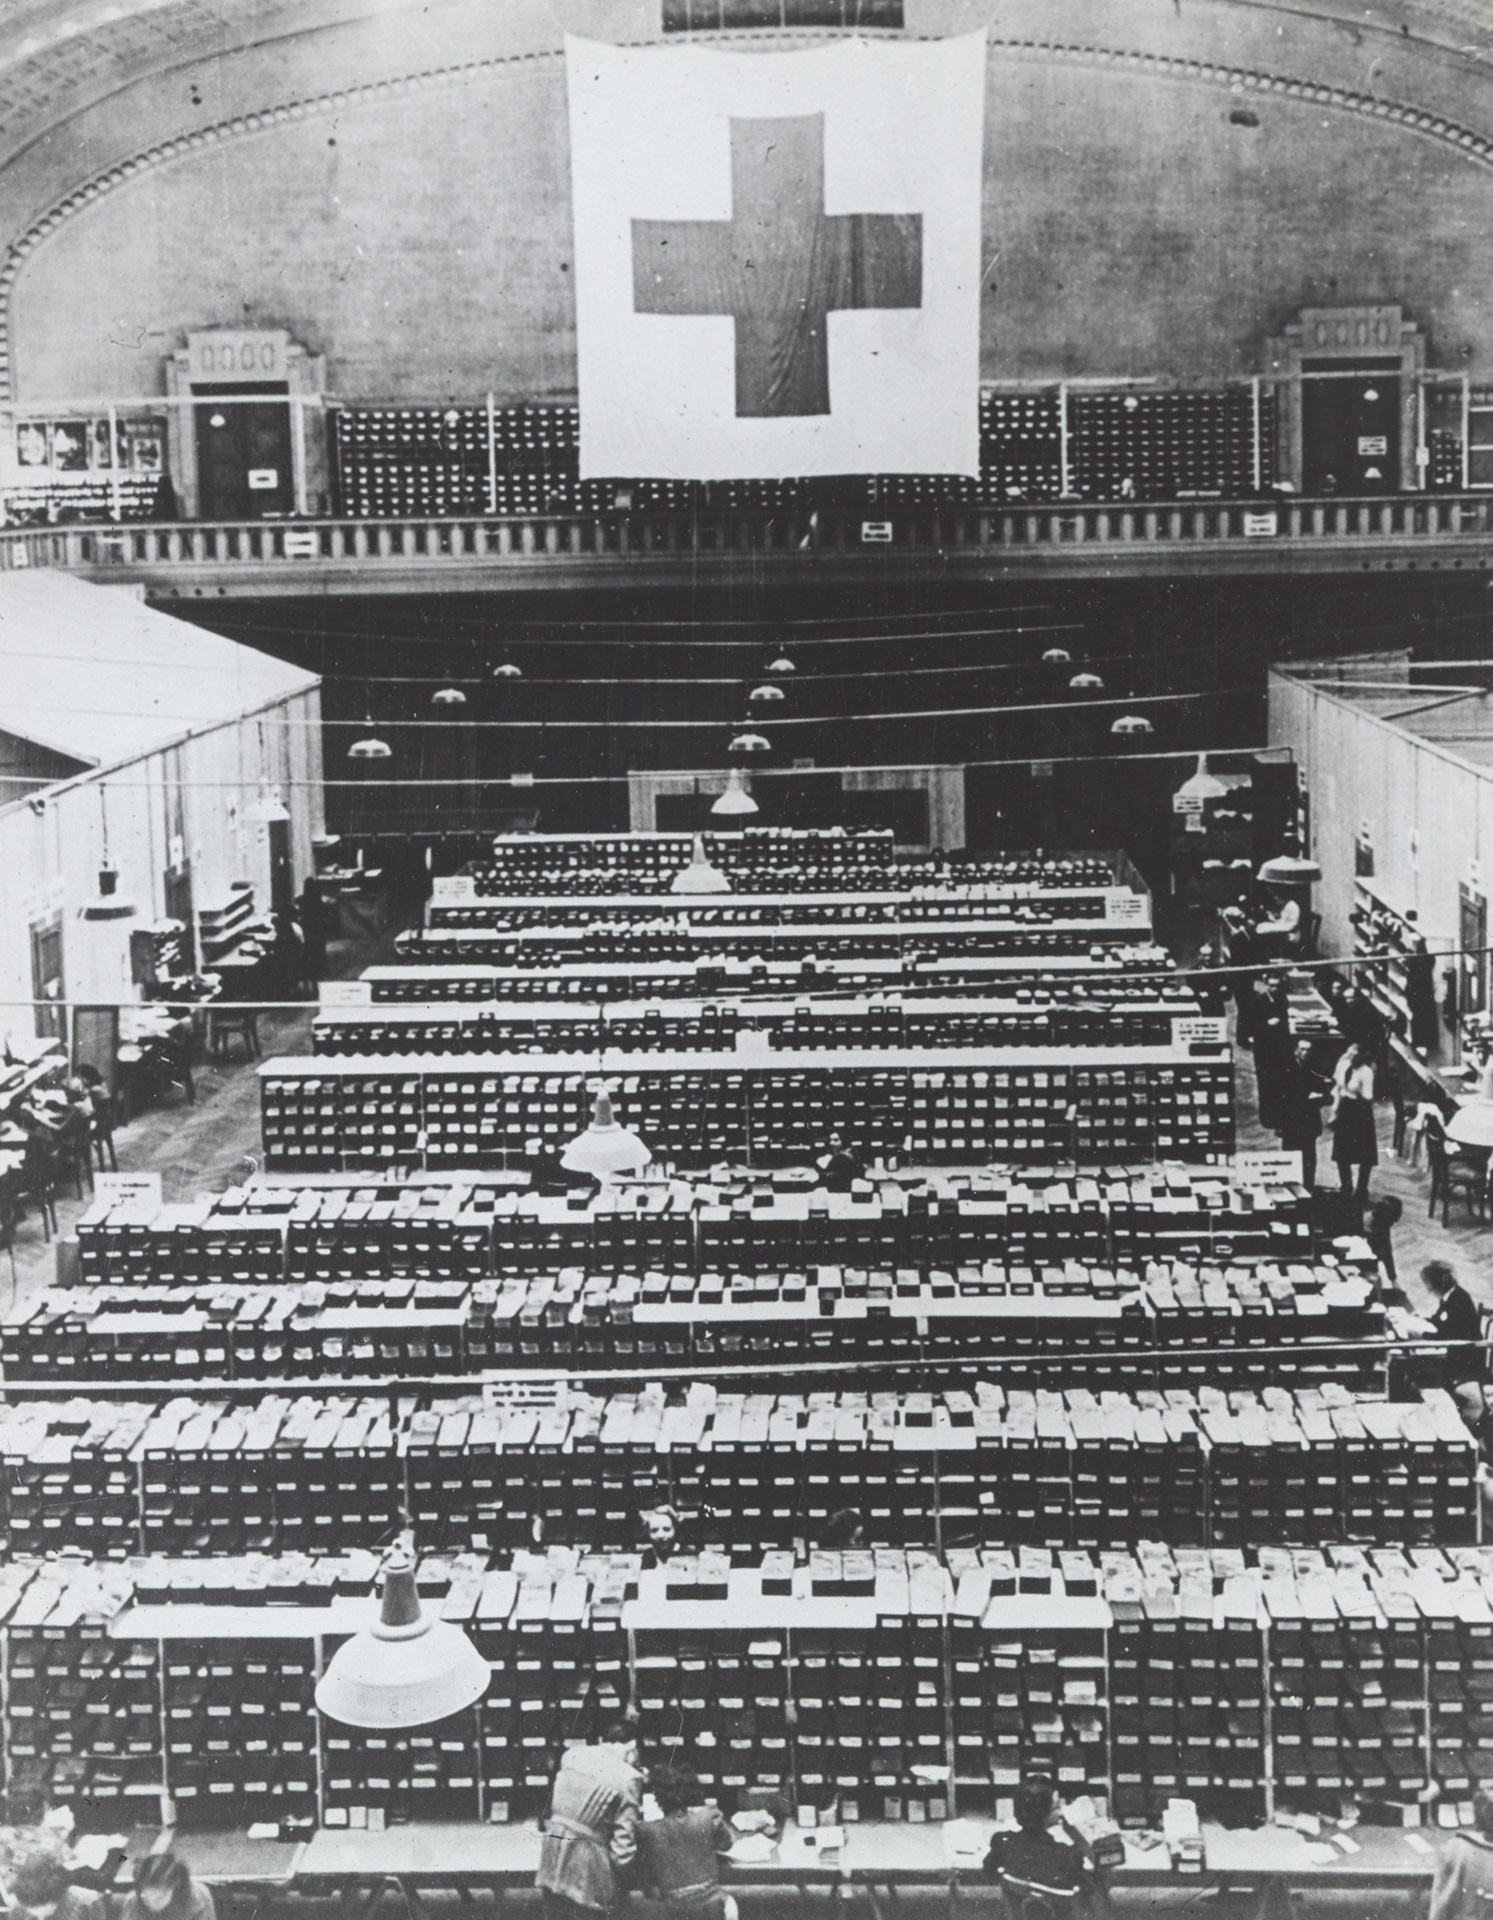 Aerial view of large hall filled with filing draws holding POW cards, large Red Cross Banner hanging above mezzanine at rear